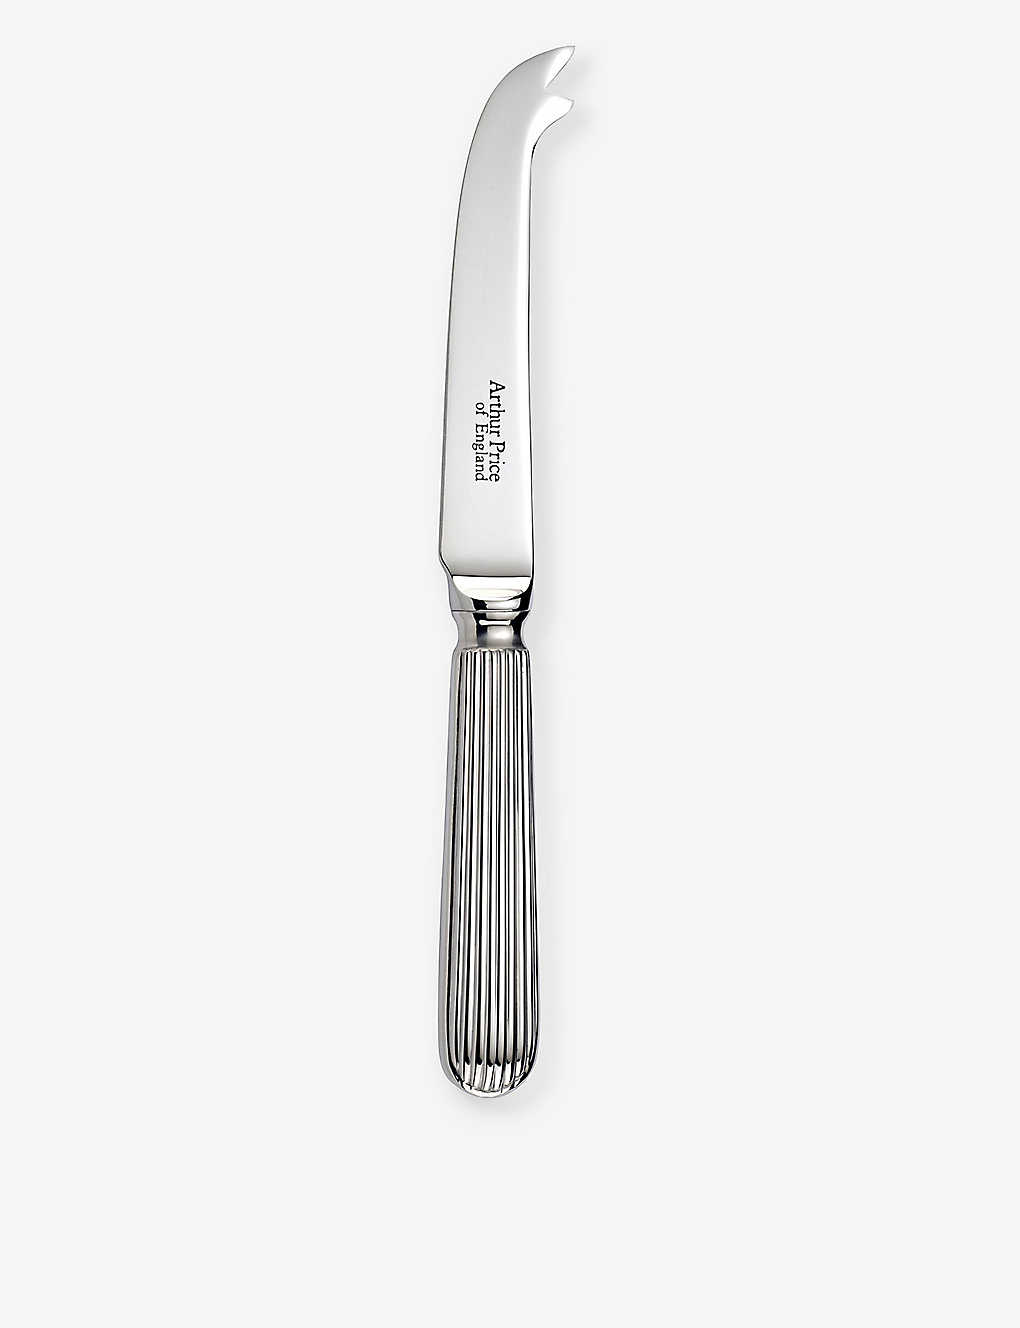 Arthur Price Titanic Silver-plated Stainless-steel Cheese Knife 20cm In Silver Plated